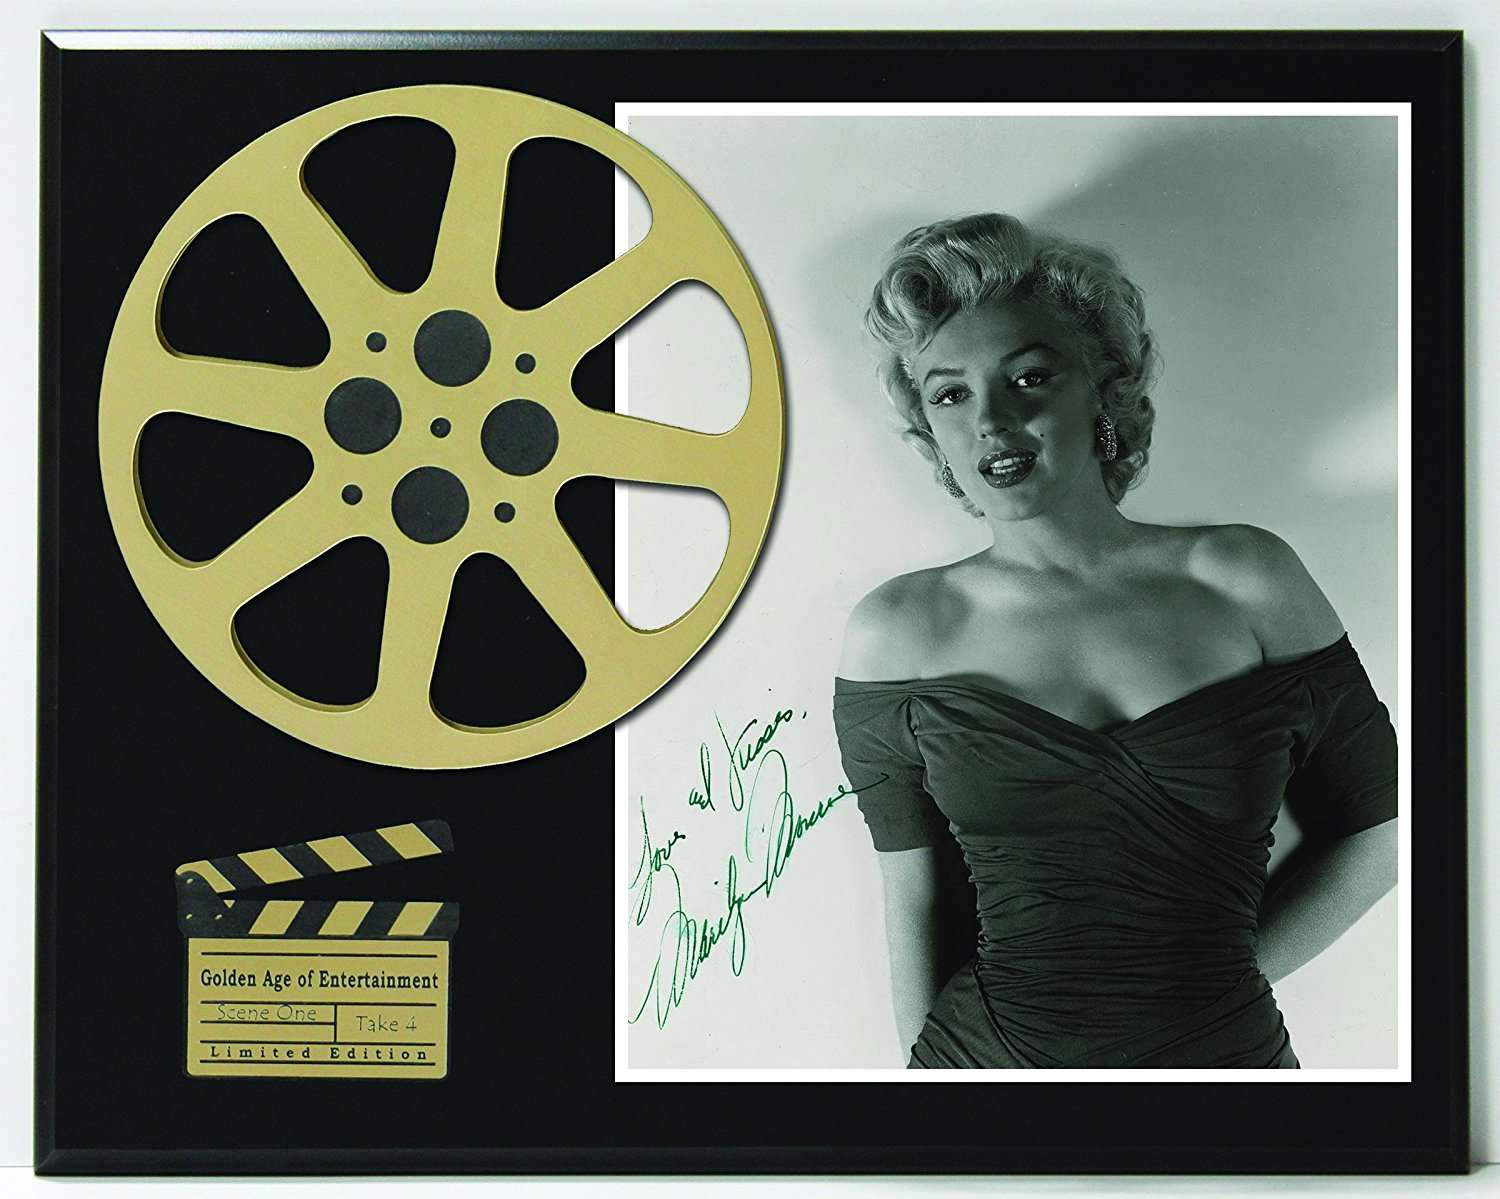 Marilyn Monroe Limited Edition Reproduction Autographed Movie Reel Display  K1 - Gold Record Outlet Album and Disc Collectible Memorabilia